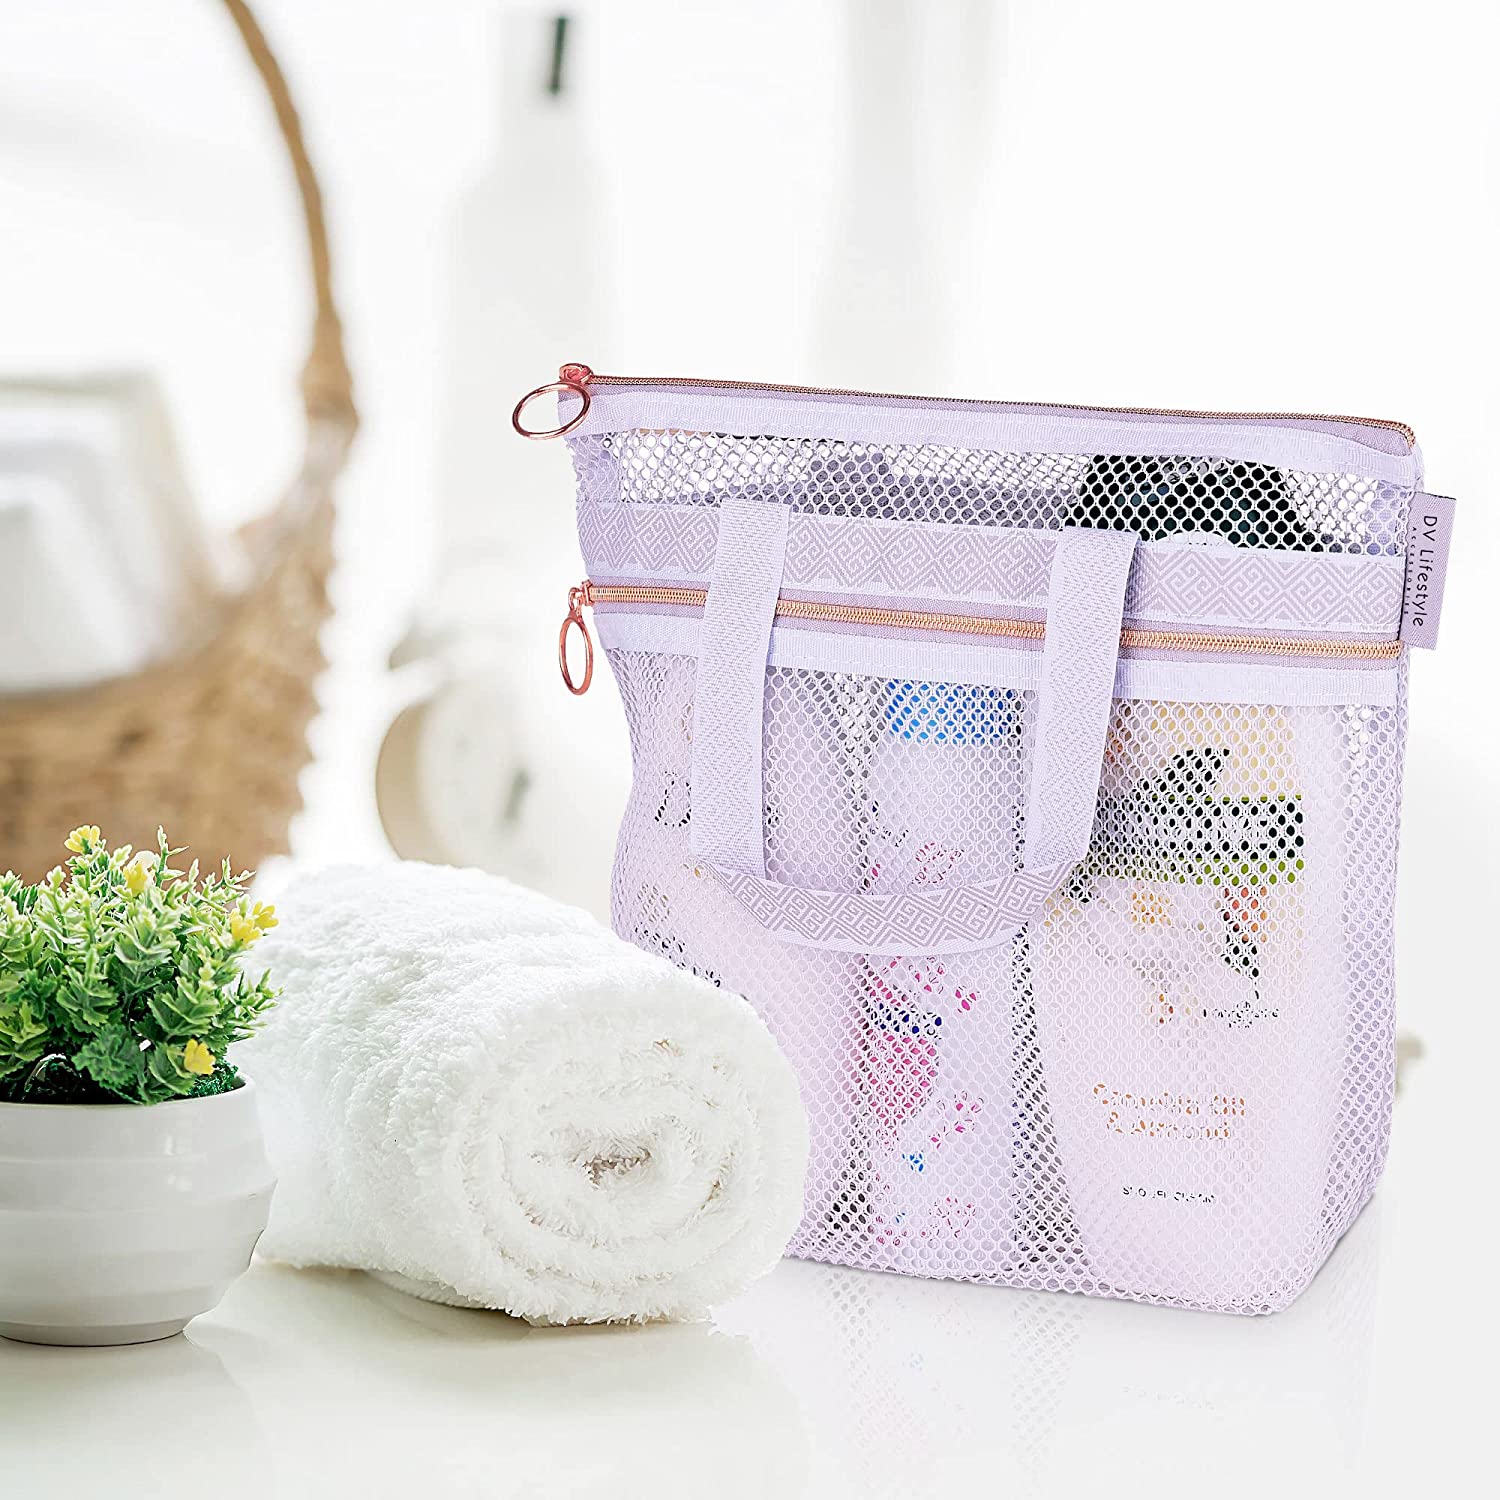 Shower Caddy Personalized, Waterproof Canvas Tote Bag, College